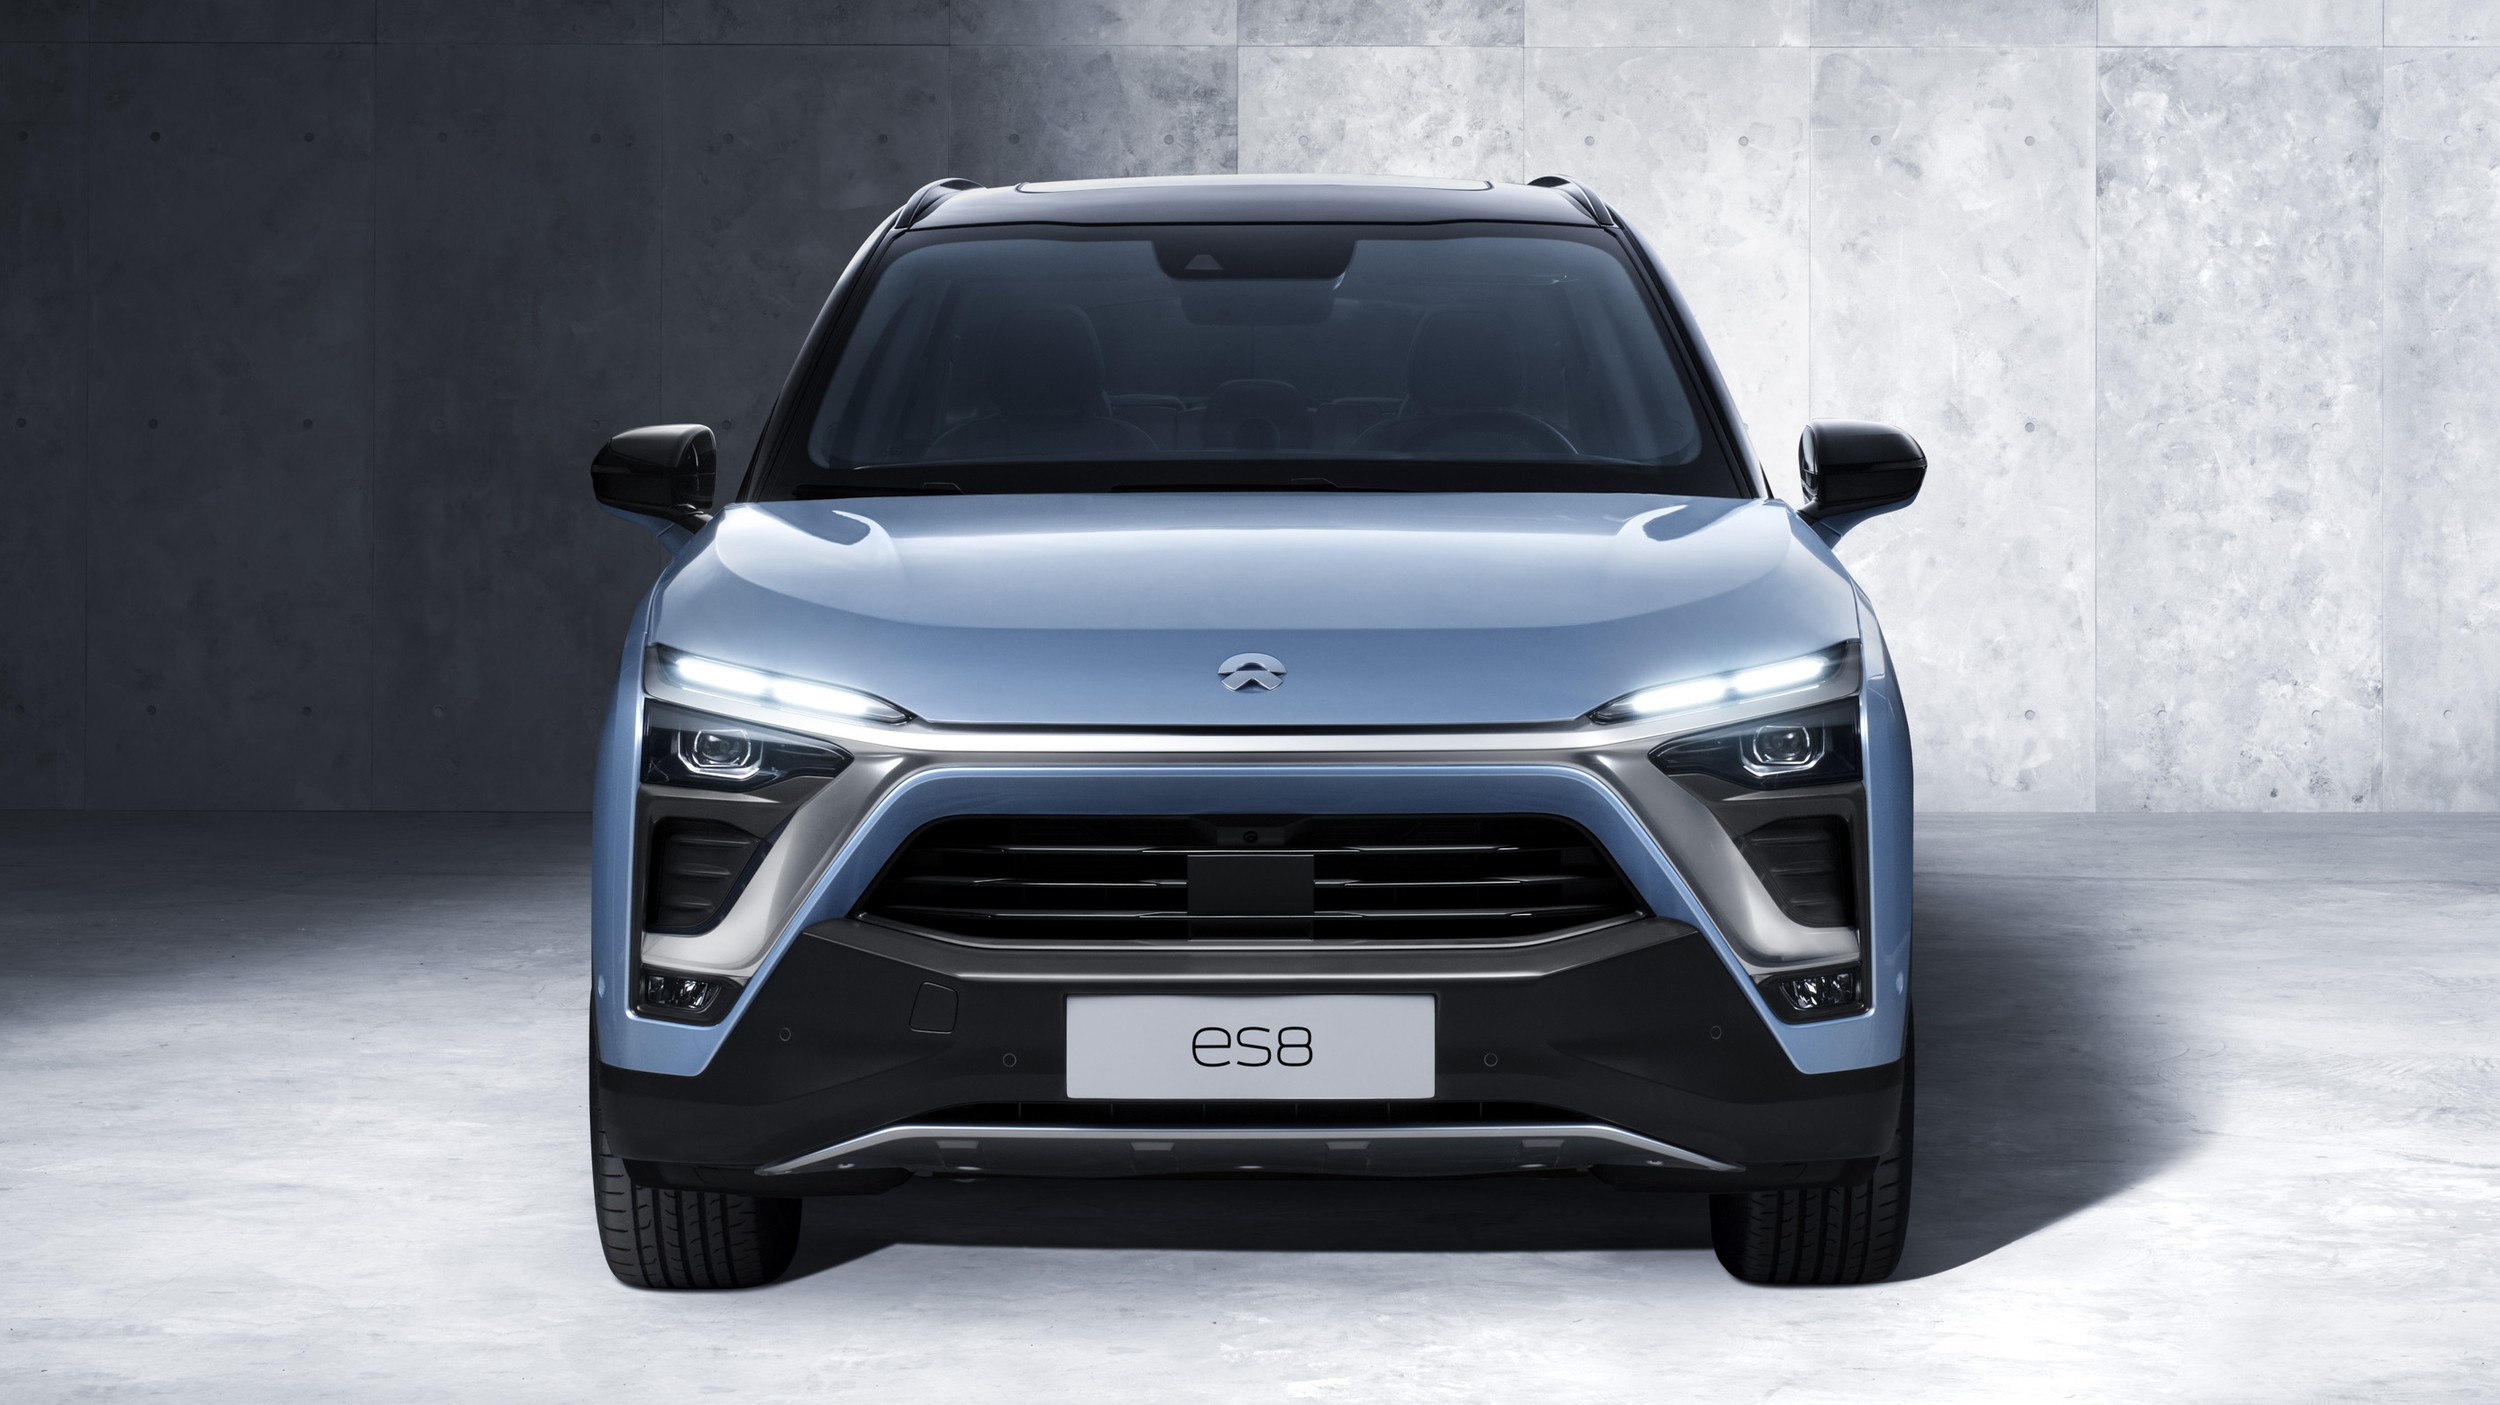 NIO ES8 Is a Model X Alternative from the Company That Made the EP9